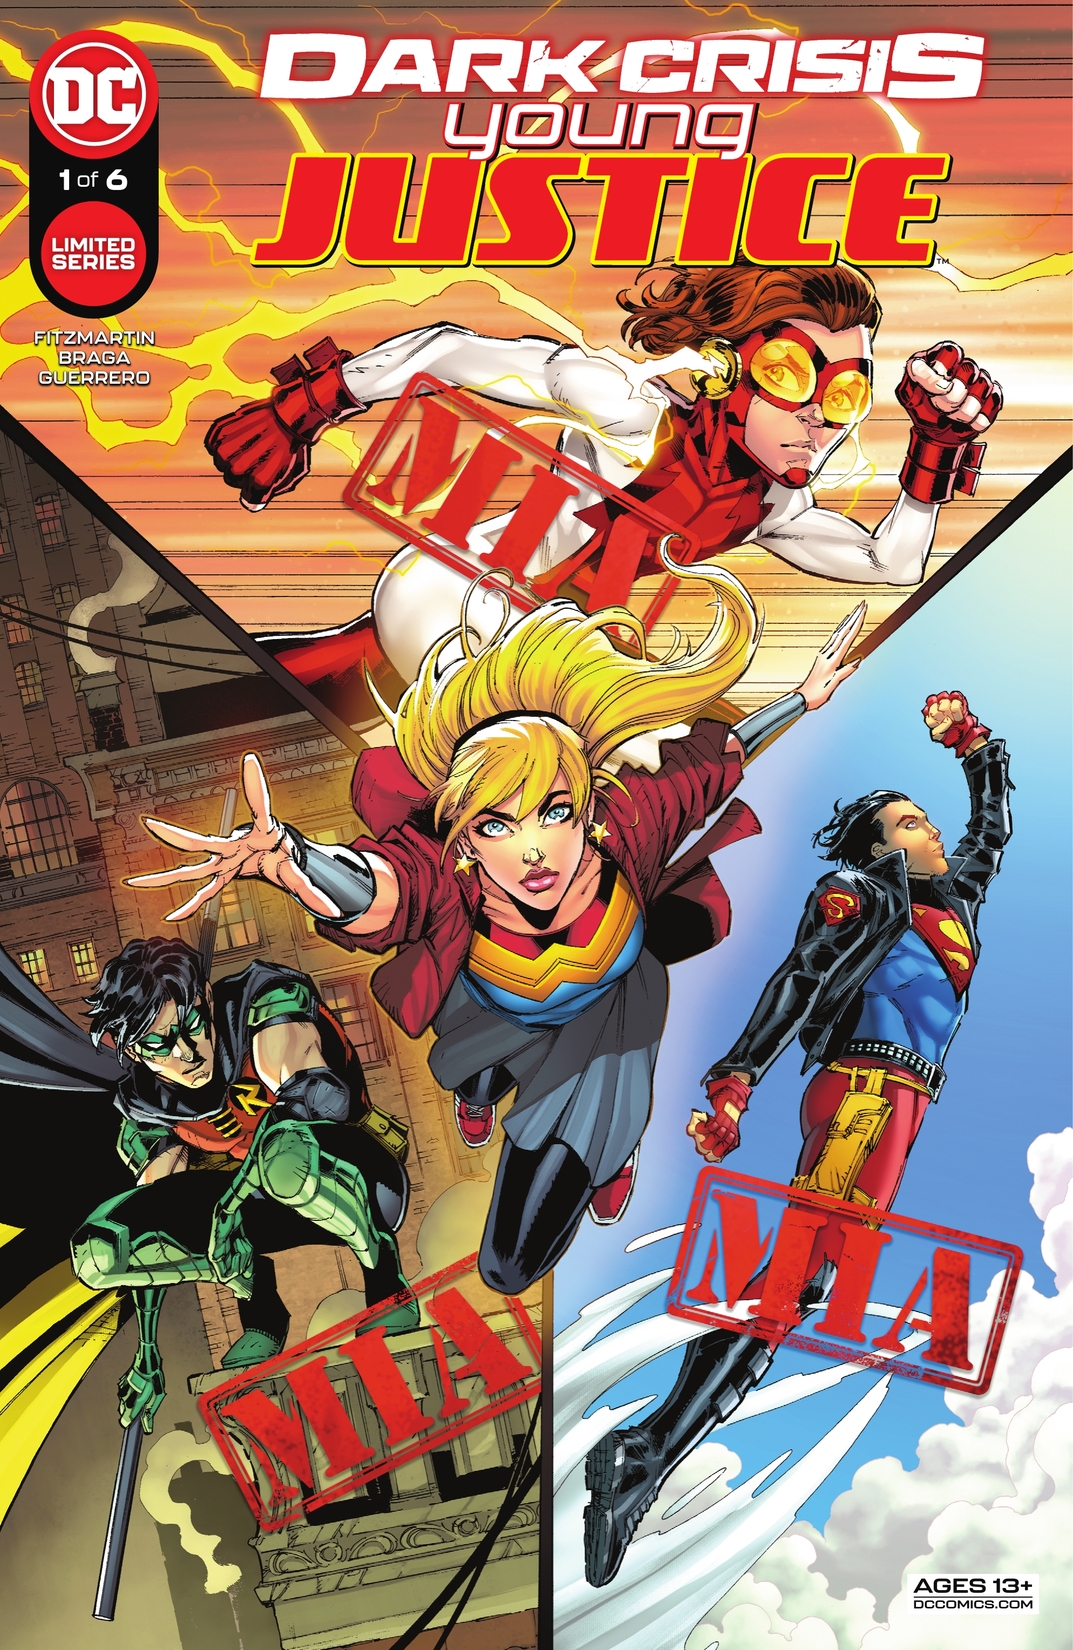 Dark Crisis: Young Justice #1 preview images